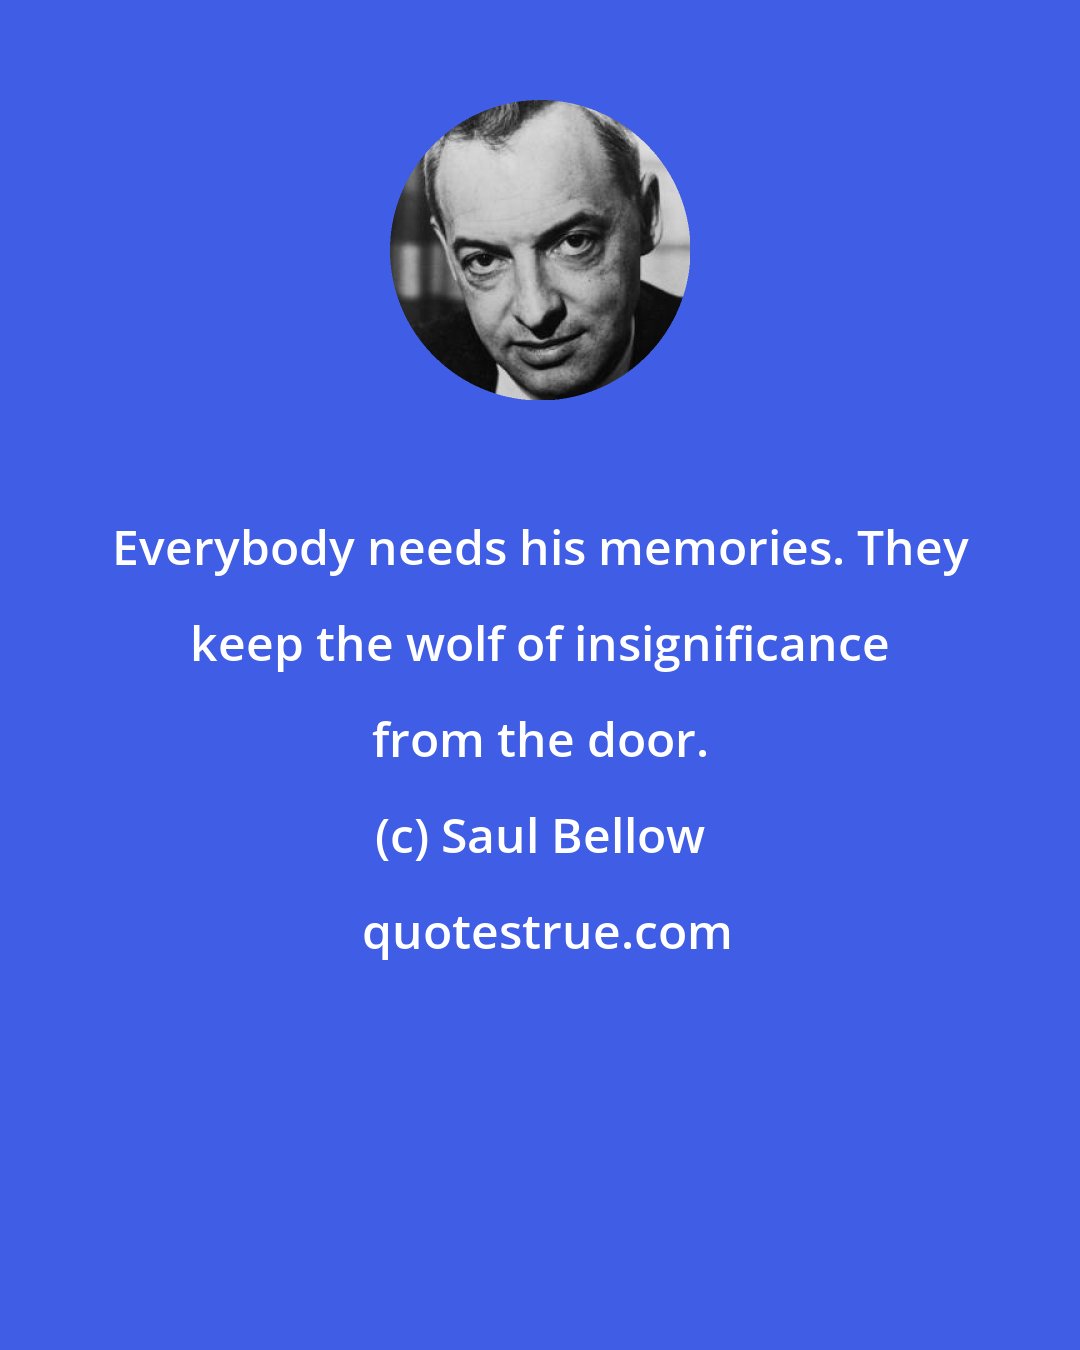 Saul Bellow: Everybody needs his memories. They keep the wolf of insignificance from the door.